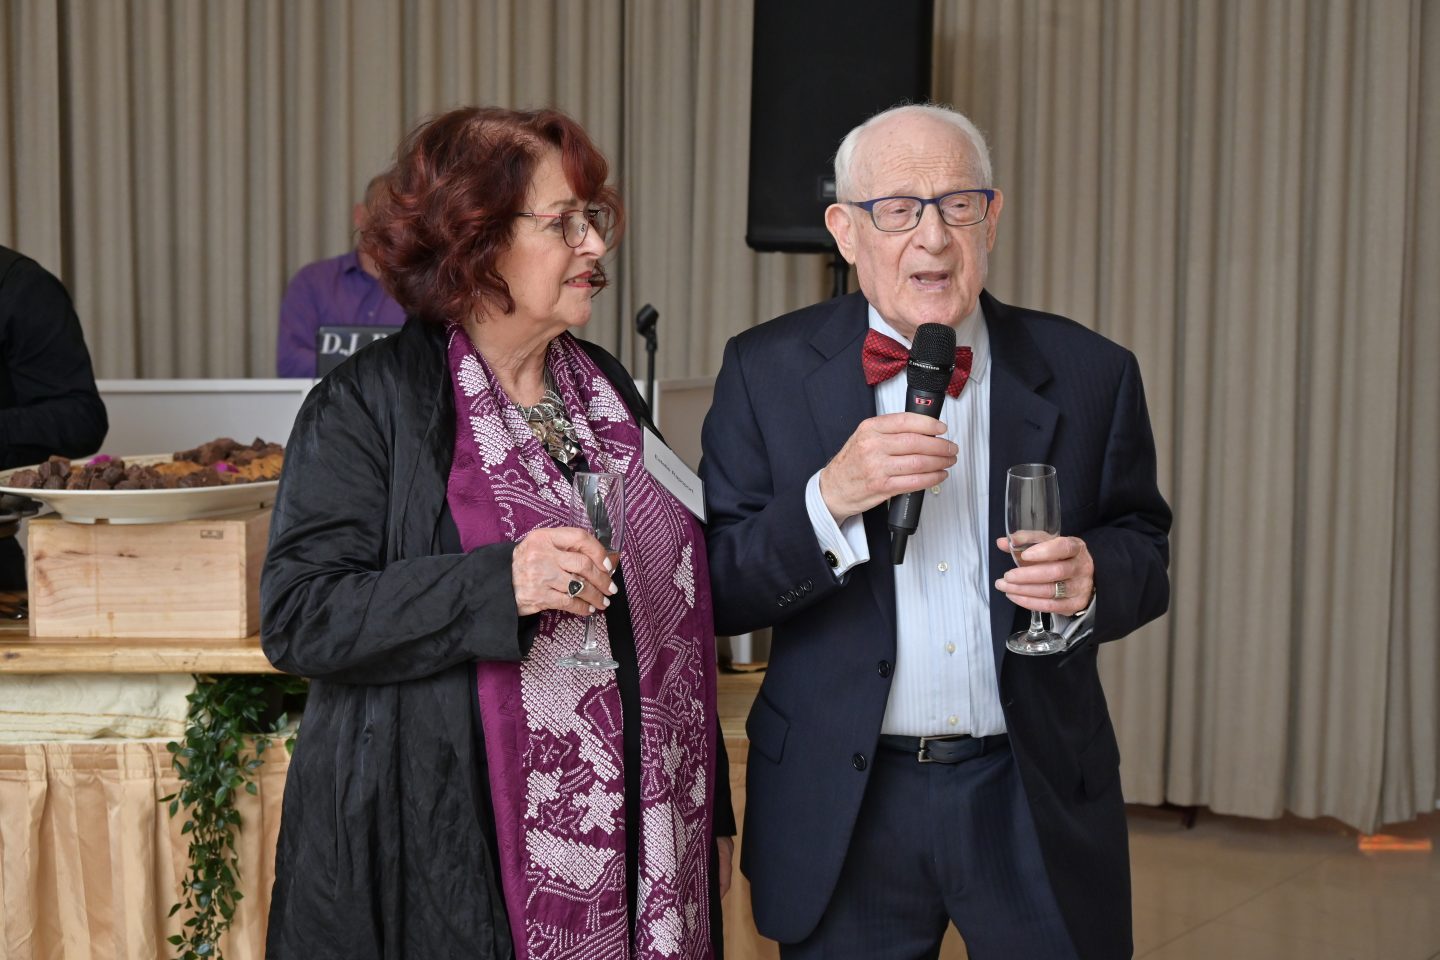 Women is purple dress and man with a microphone